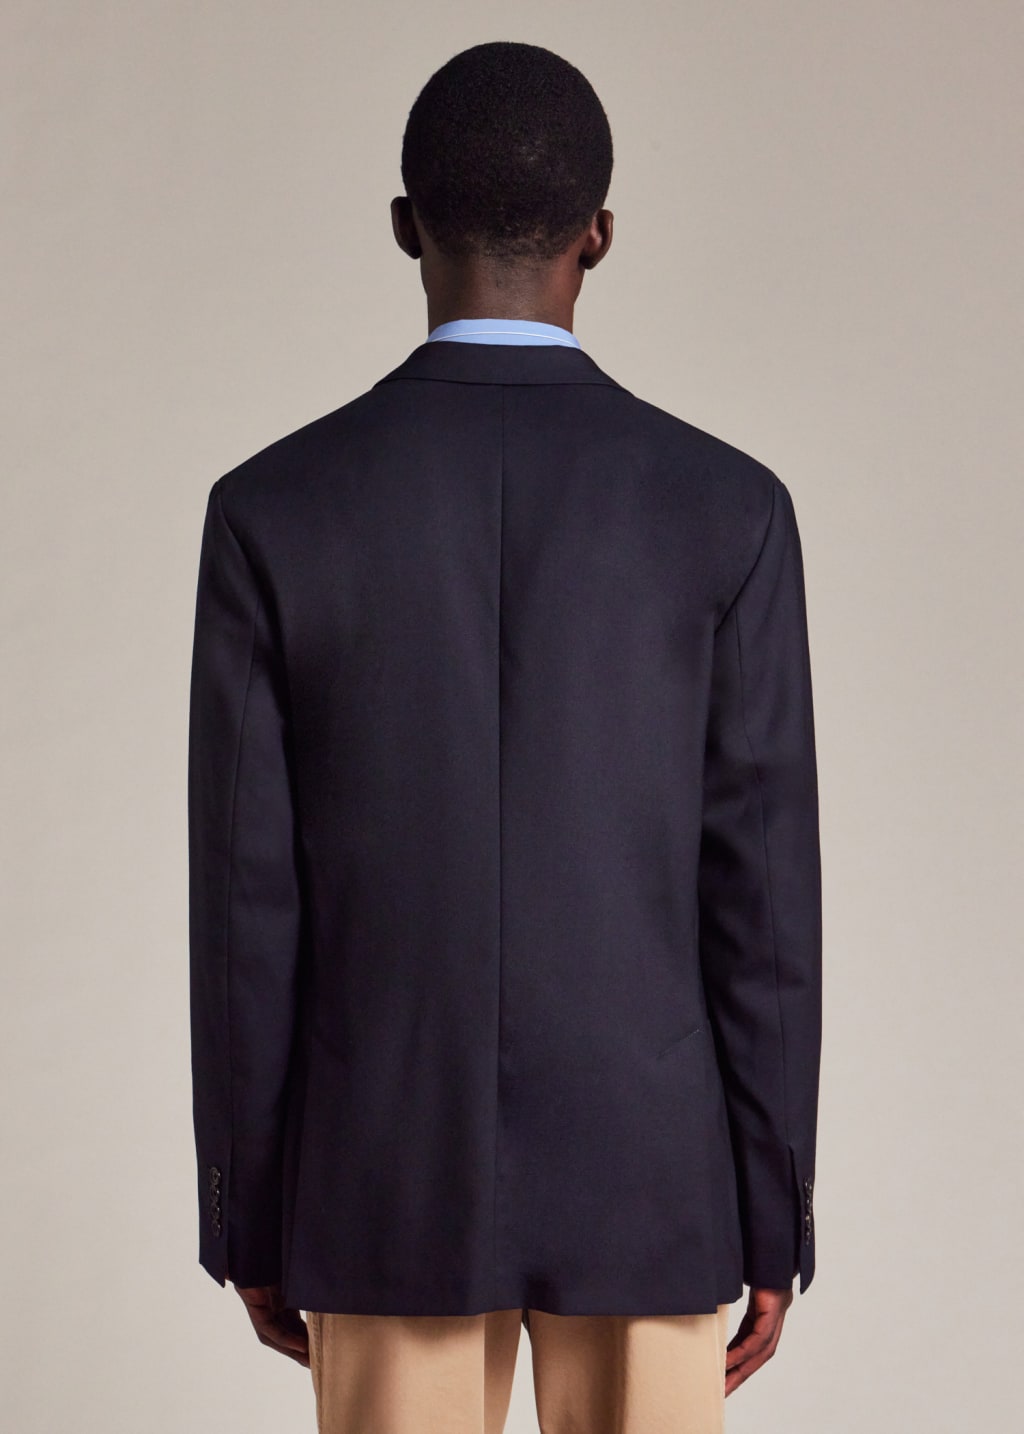 Model View - A Suit To Travel In - Tailored-Fit Navy Patch-Pocket Unlined Blazer Paul Smith